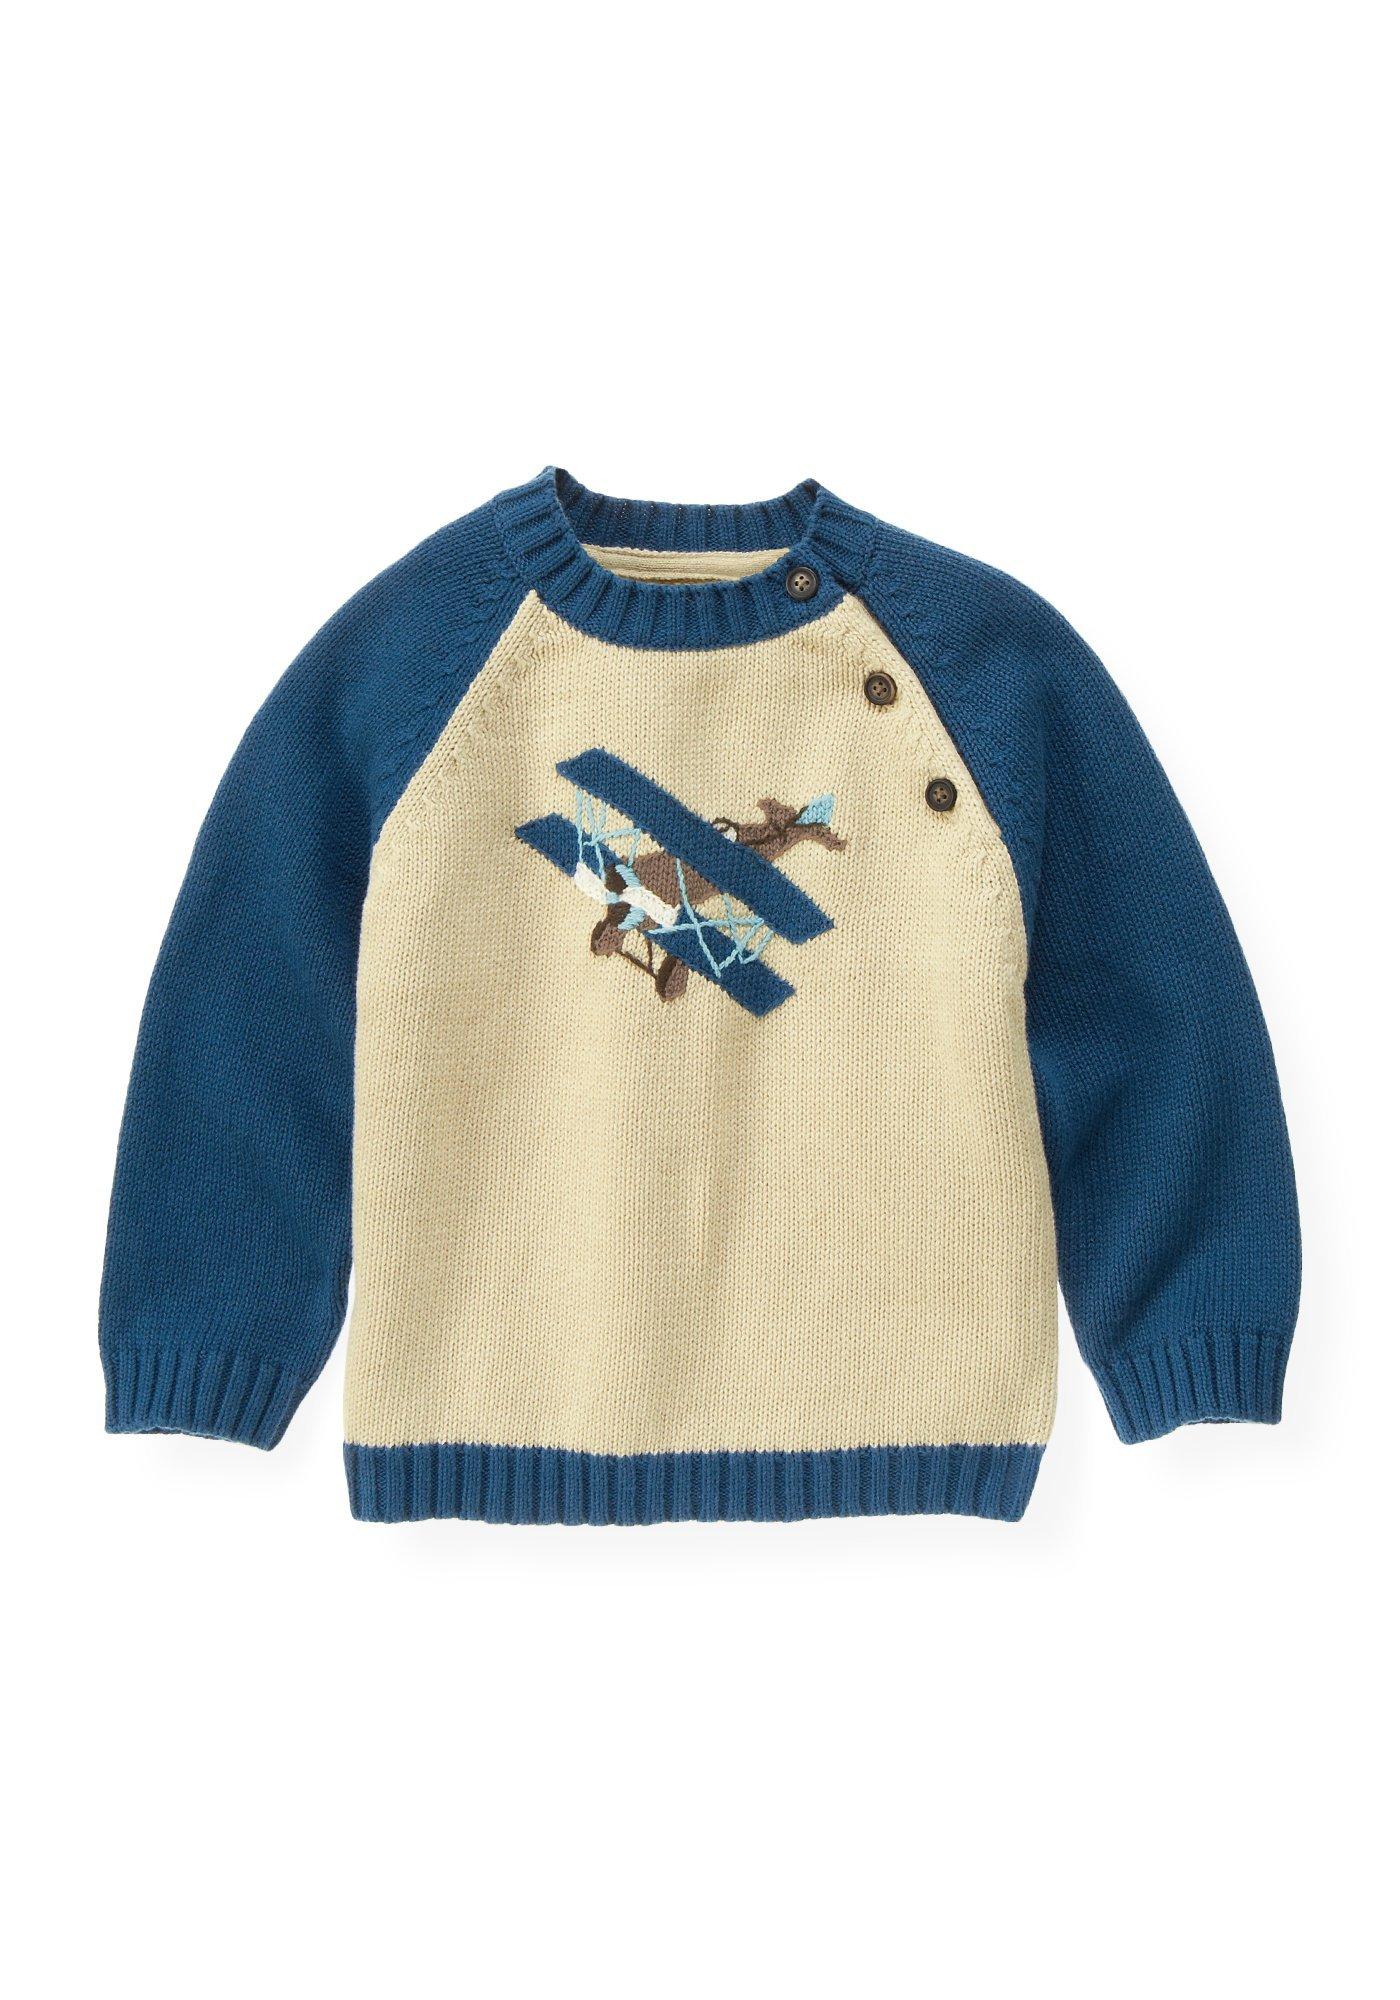 Airplane Sweater image number 0